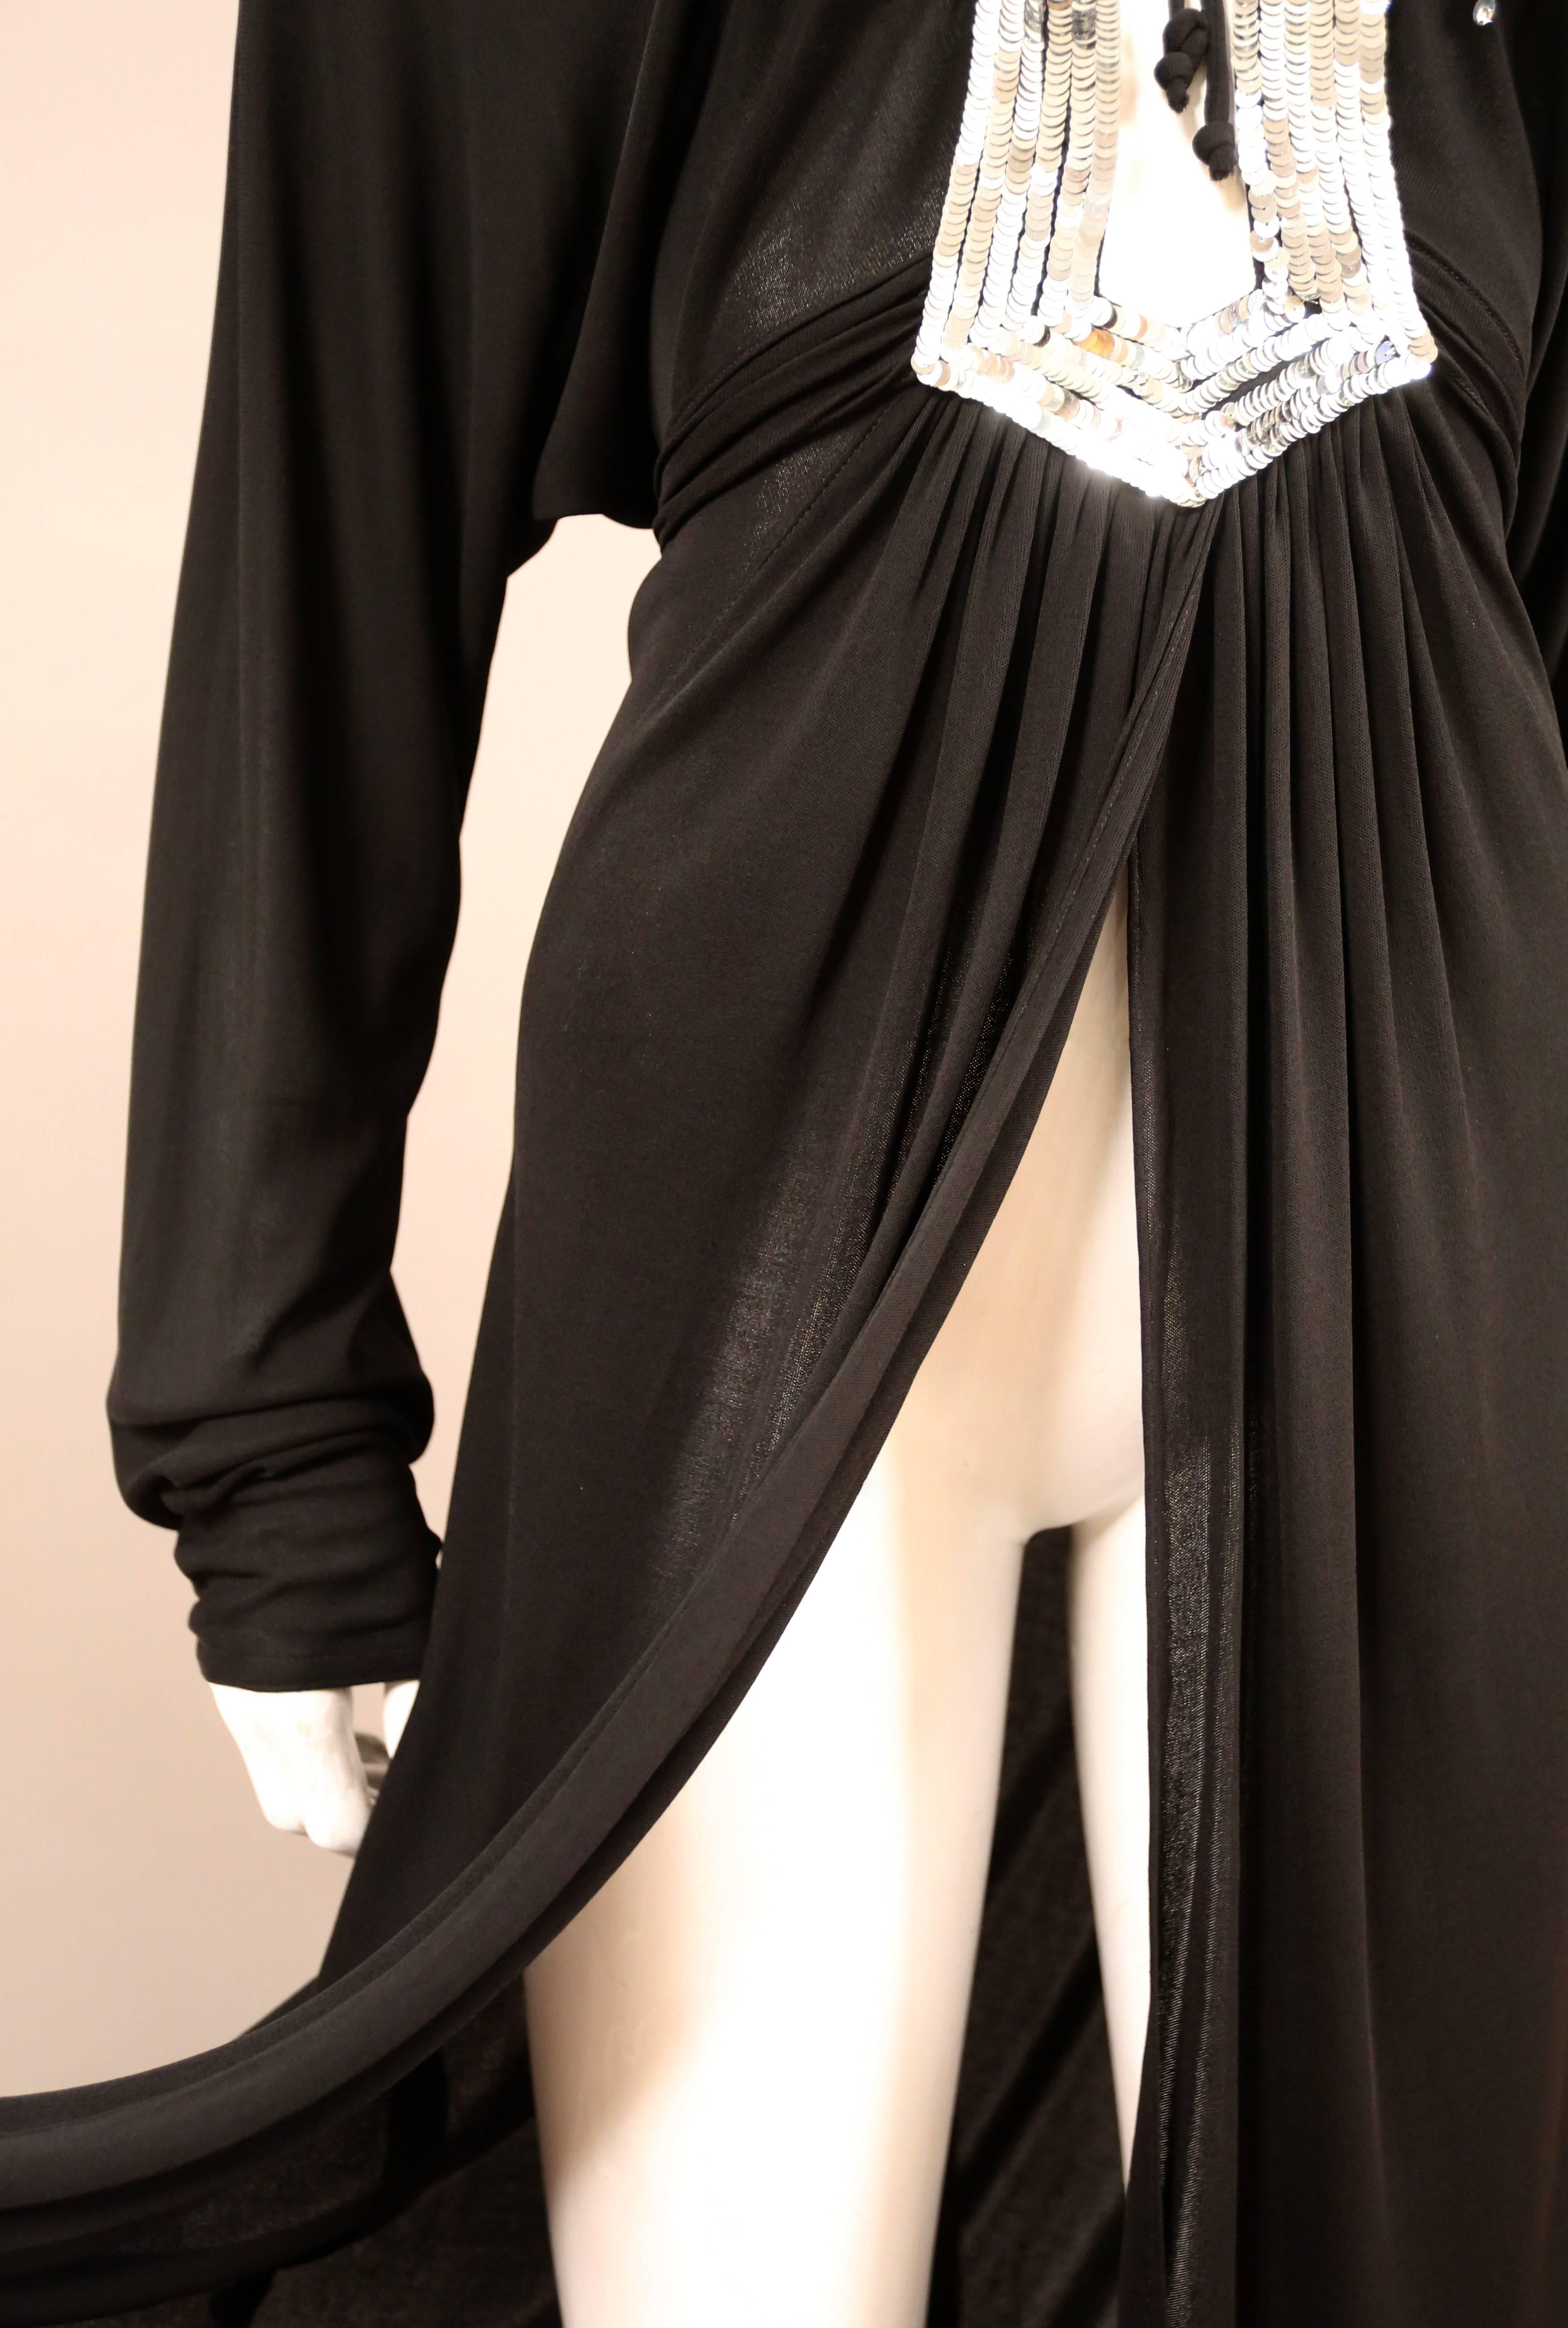 Black Ossie Clark black jersey sequinned evening wrap dress with train, C. 1978